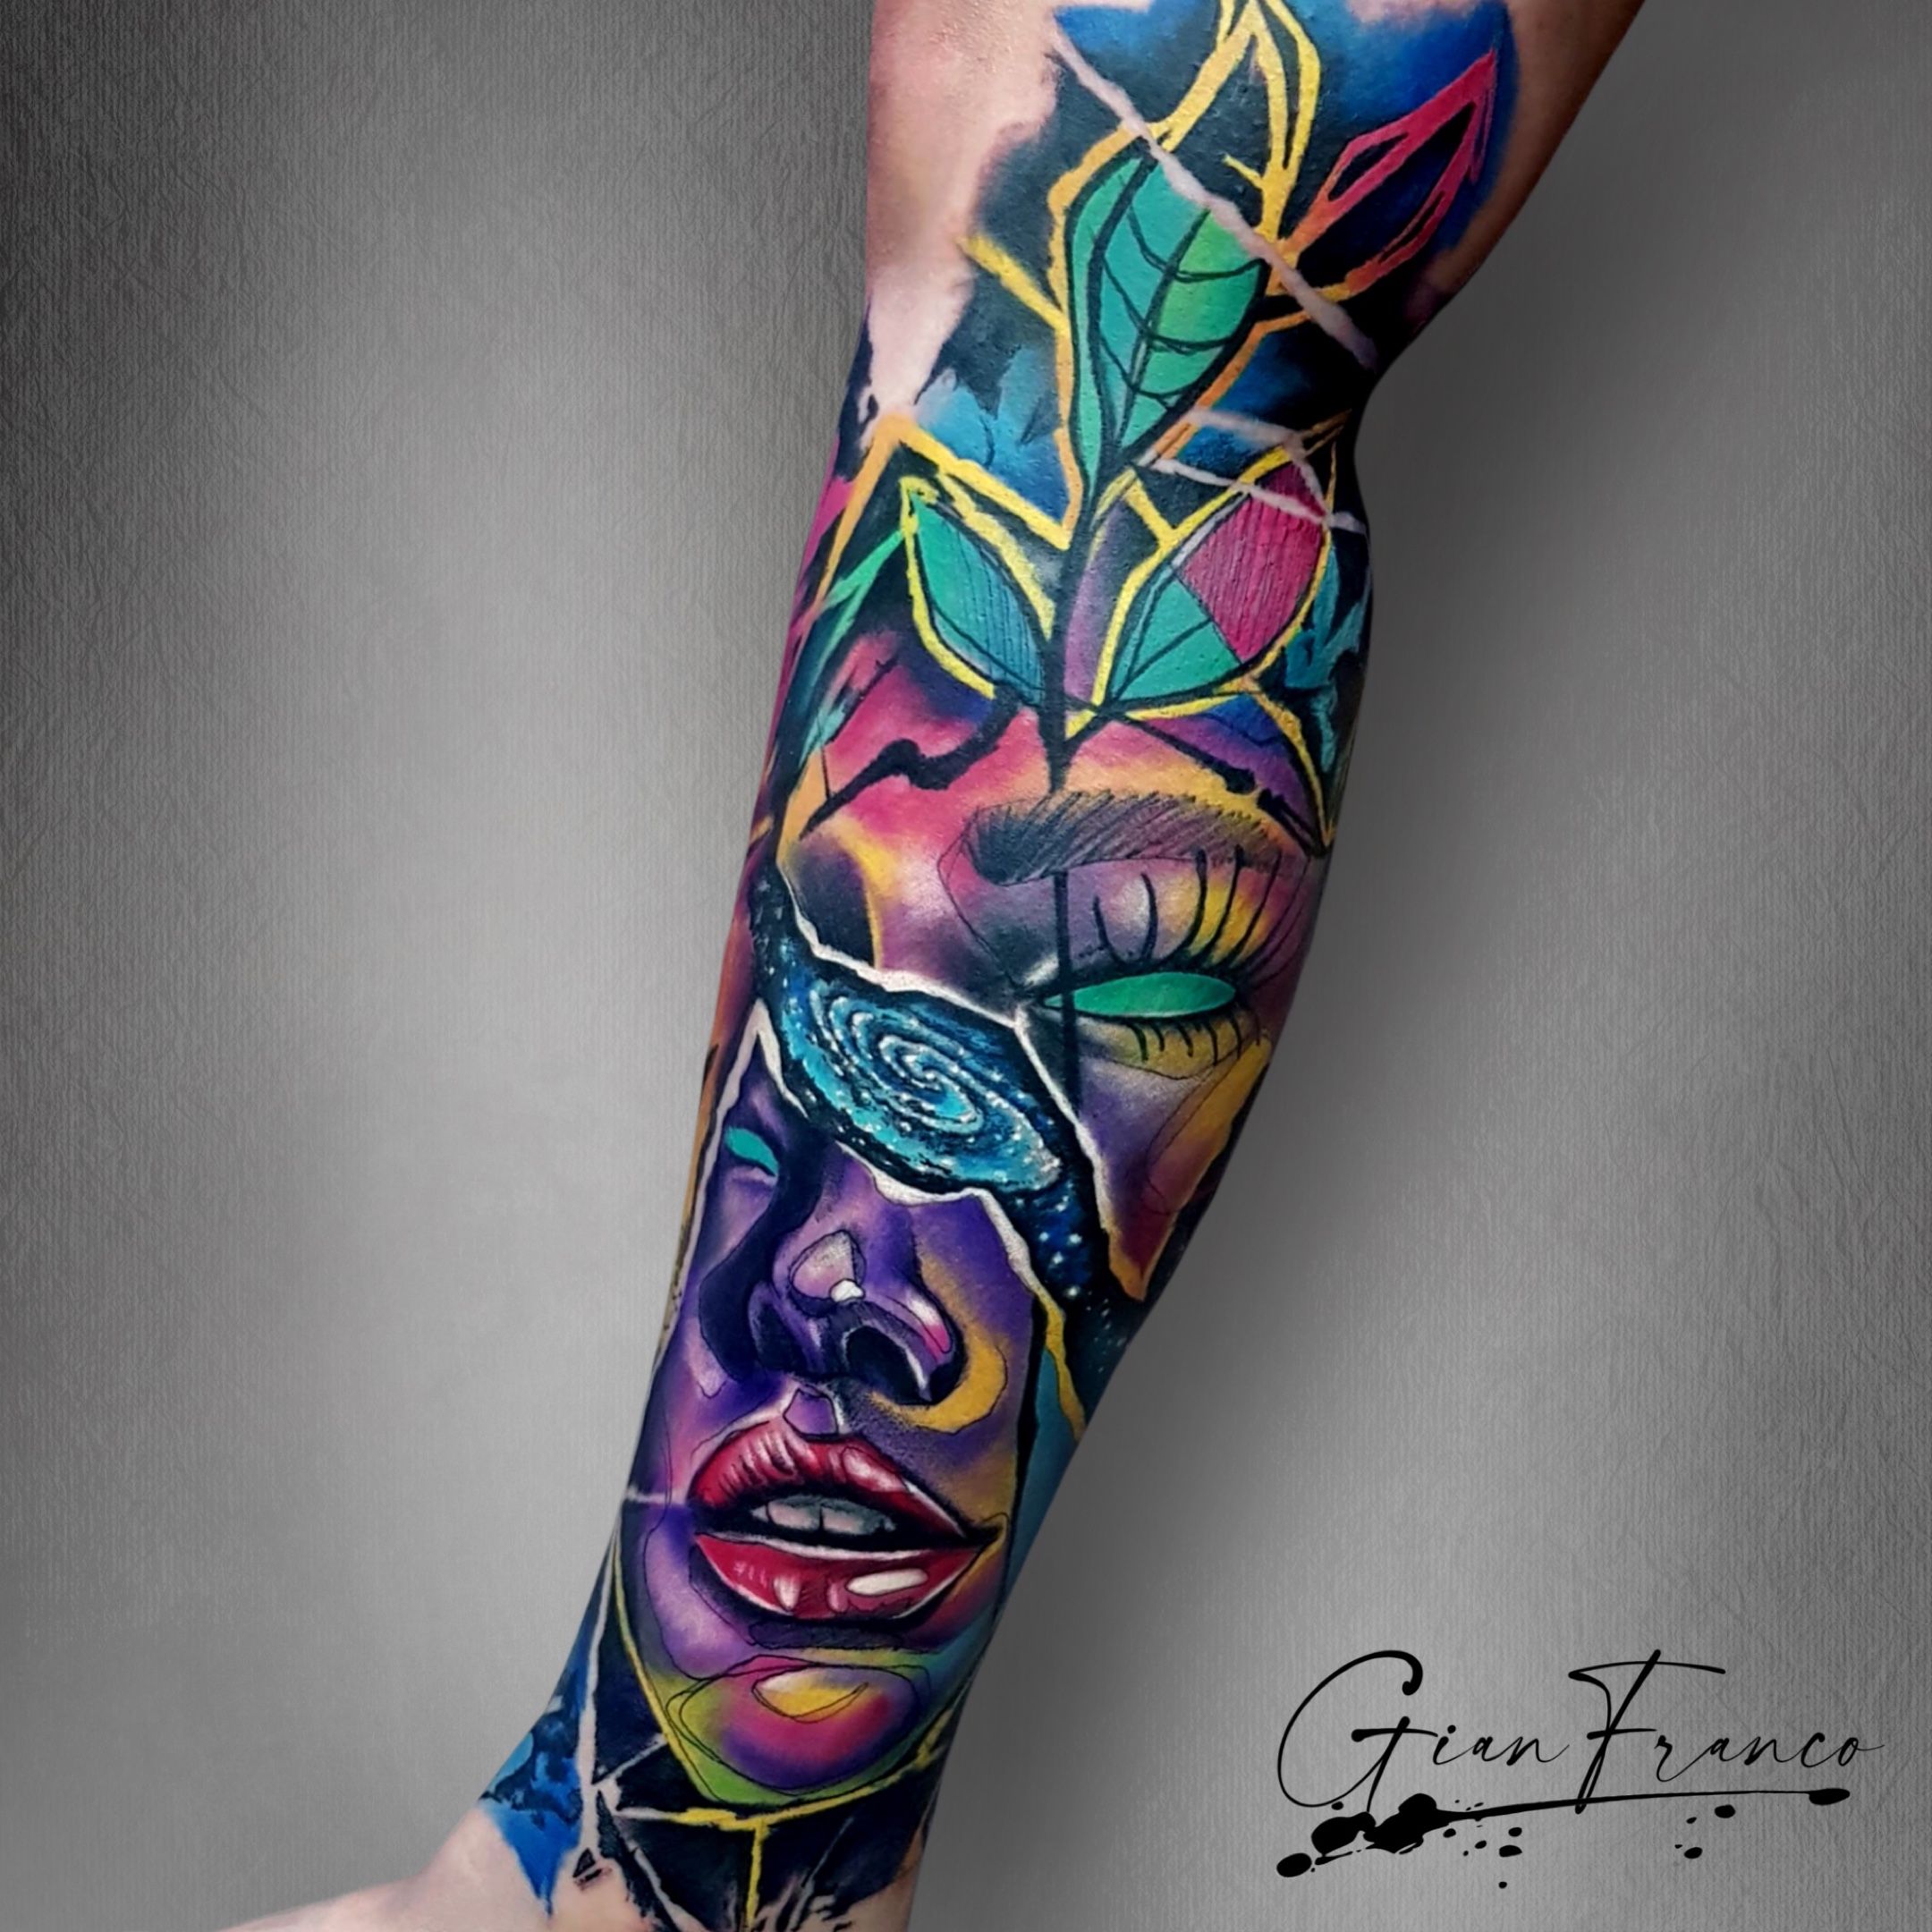 Full color scale of the universe tattoo 34 years old  ragedtattoos